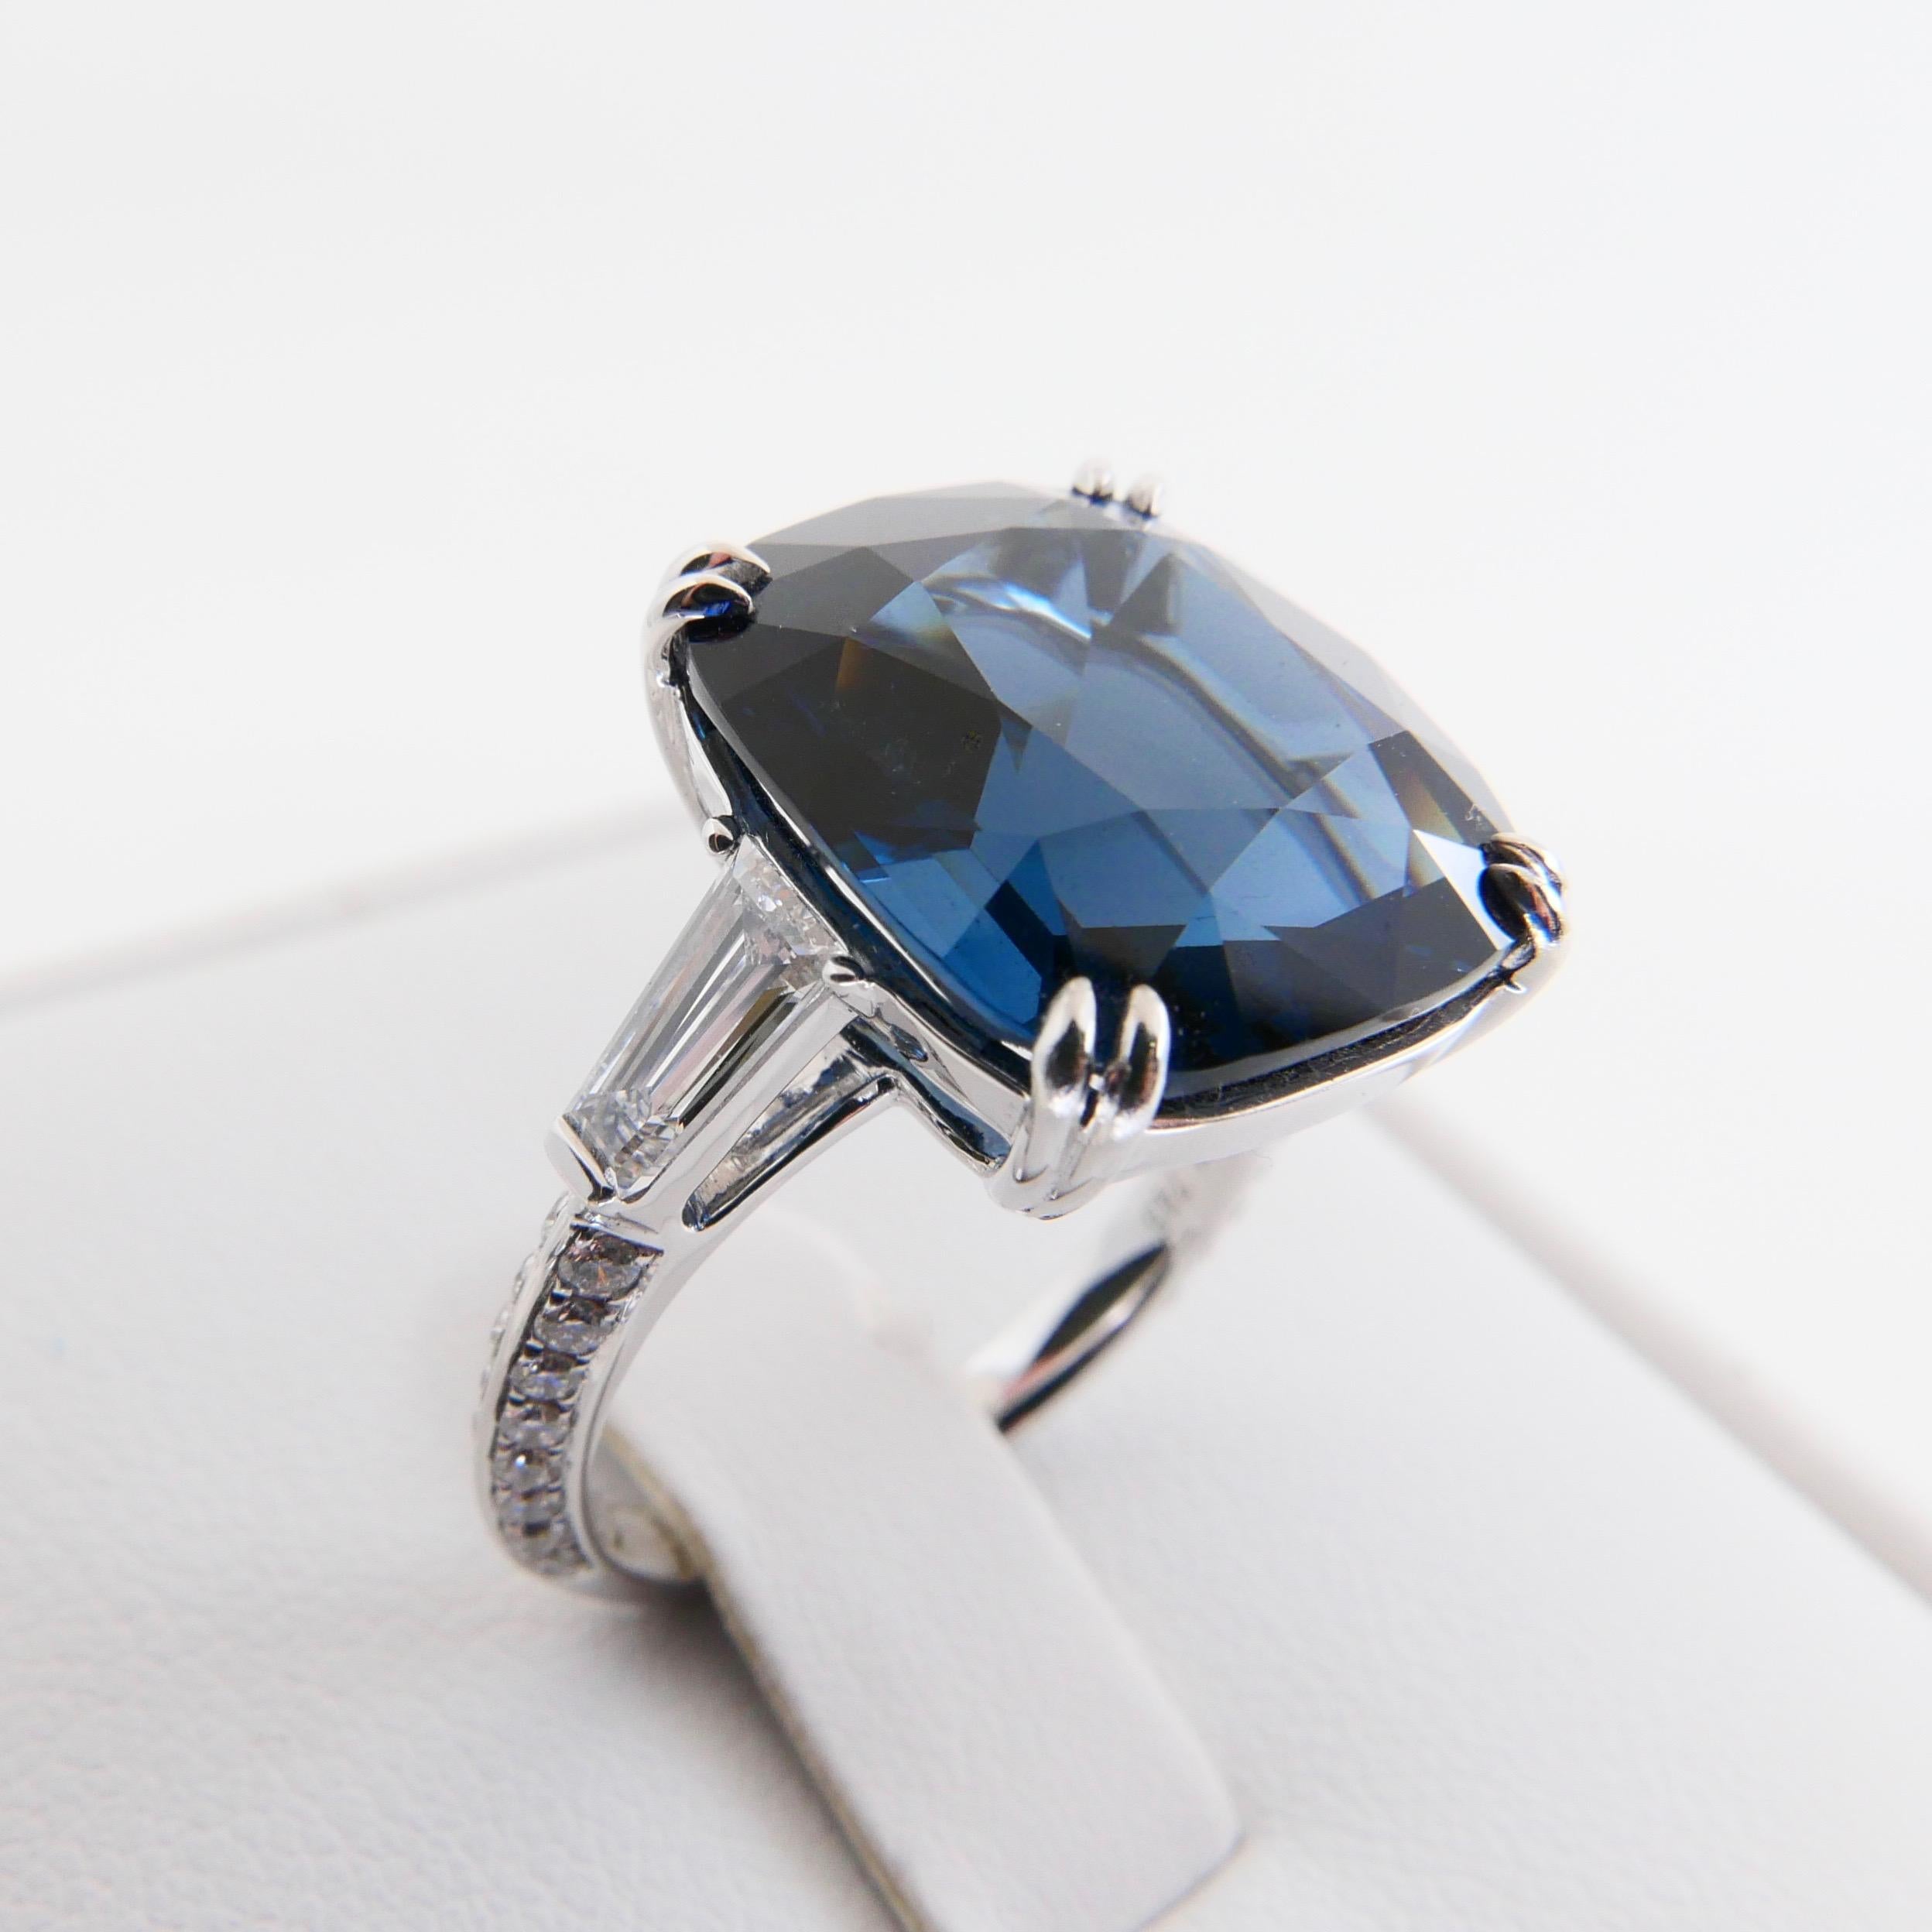 Important Certified 10.10 Carat Cobalt Spinel Diamond Cocktail Ring. Exquisite. 6